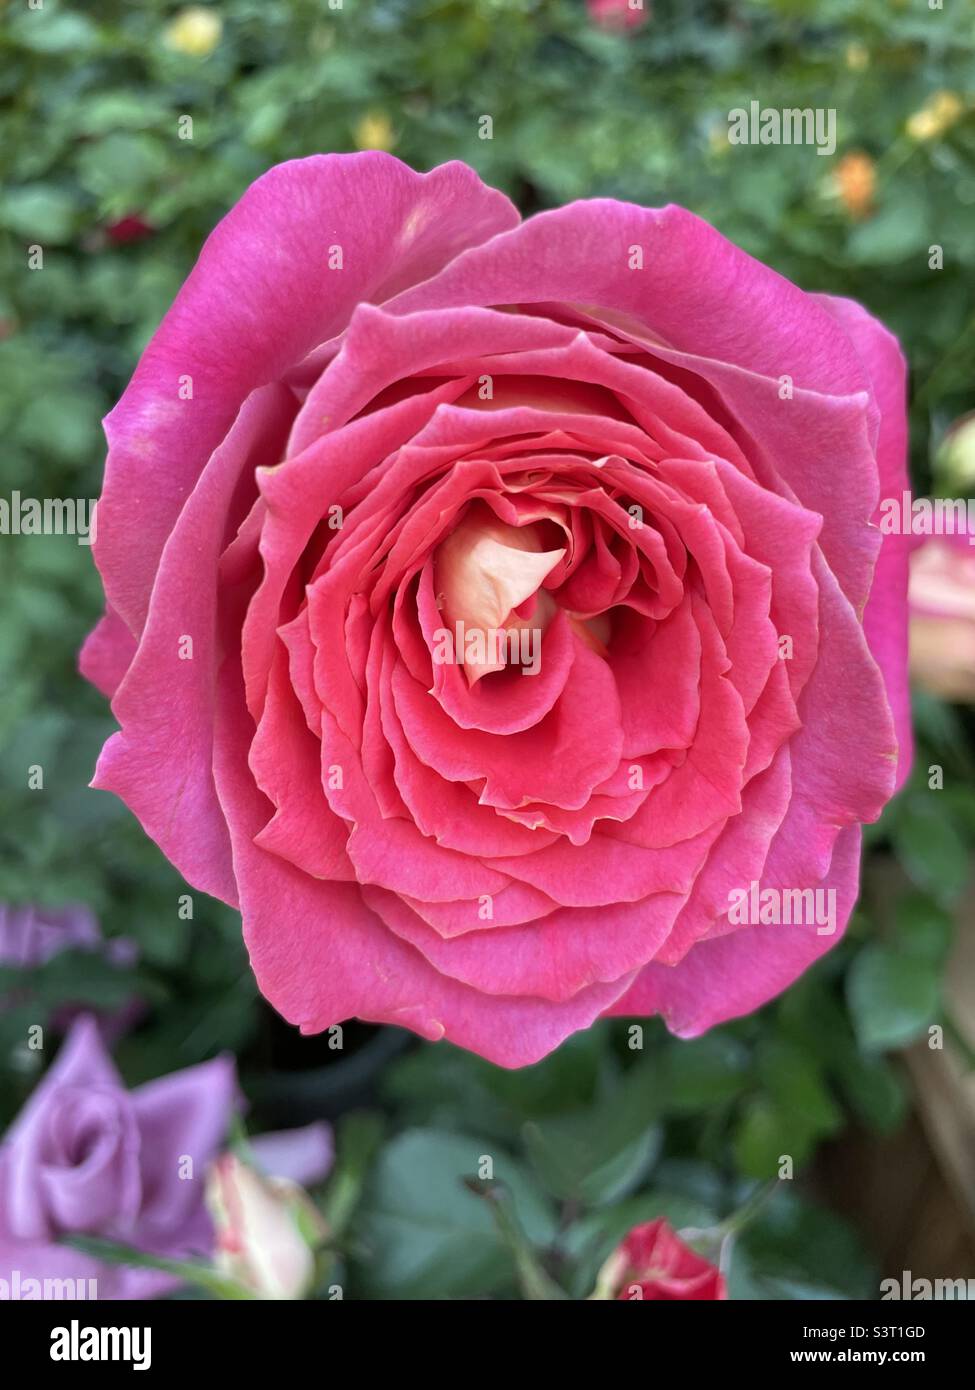 Pink rose in full bloom Stock Photo